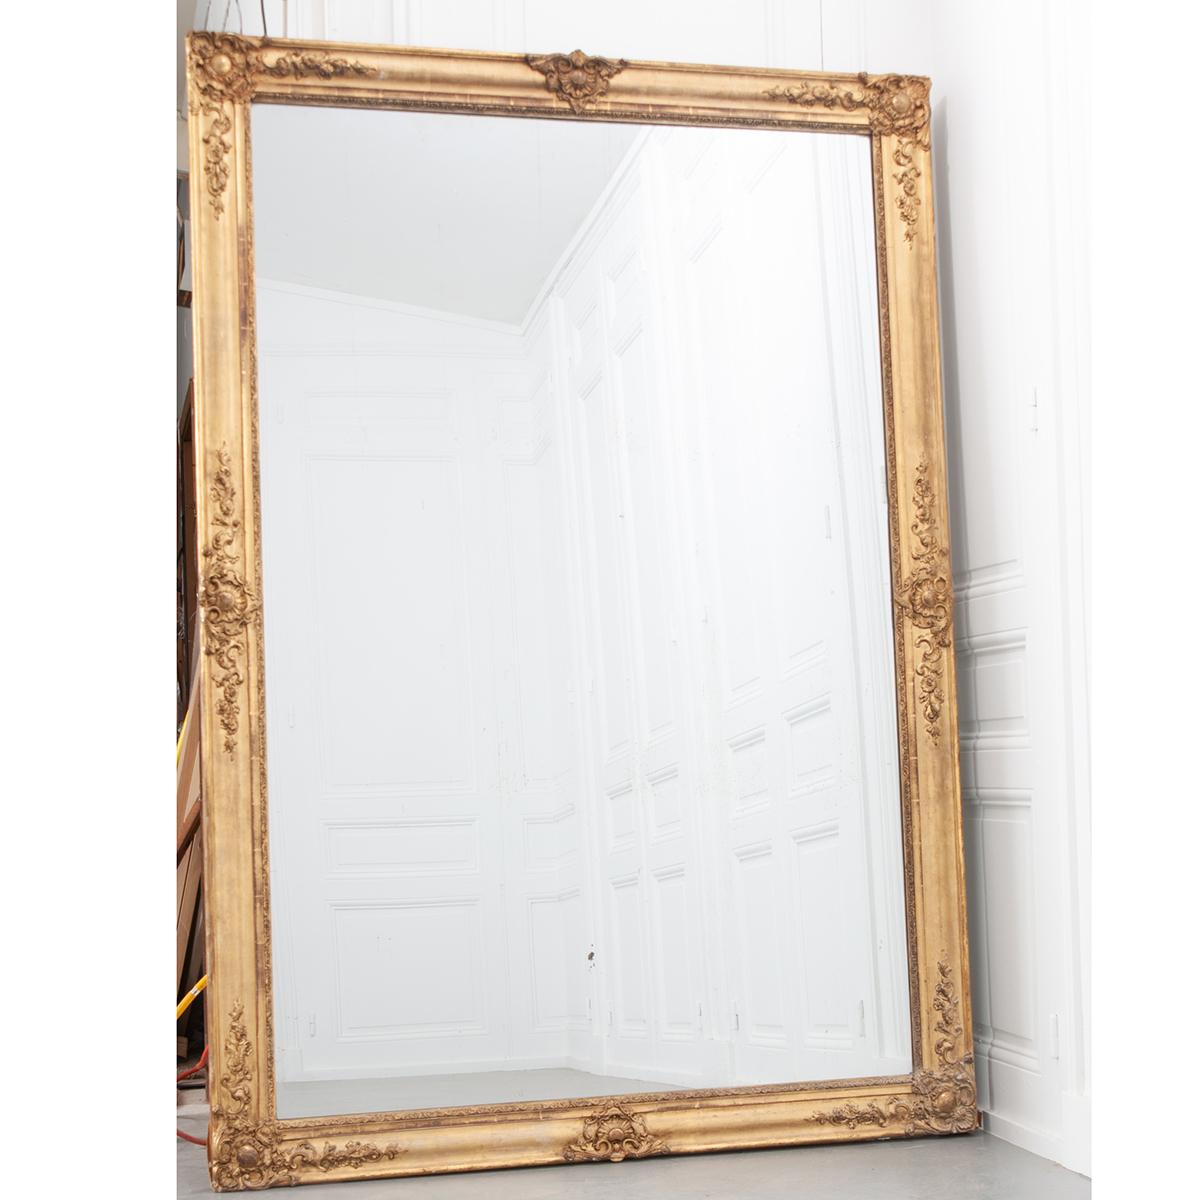 Huge French 19th century mirror with its original mirror plate. Both the frame and mirror show age. The gold gilt frame has carvings on all four corners as well as the center of each side.